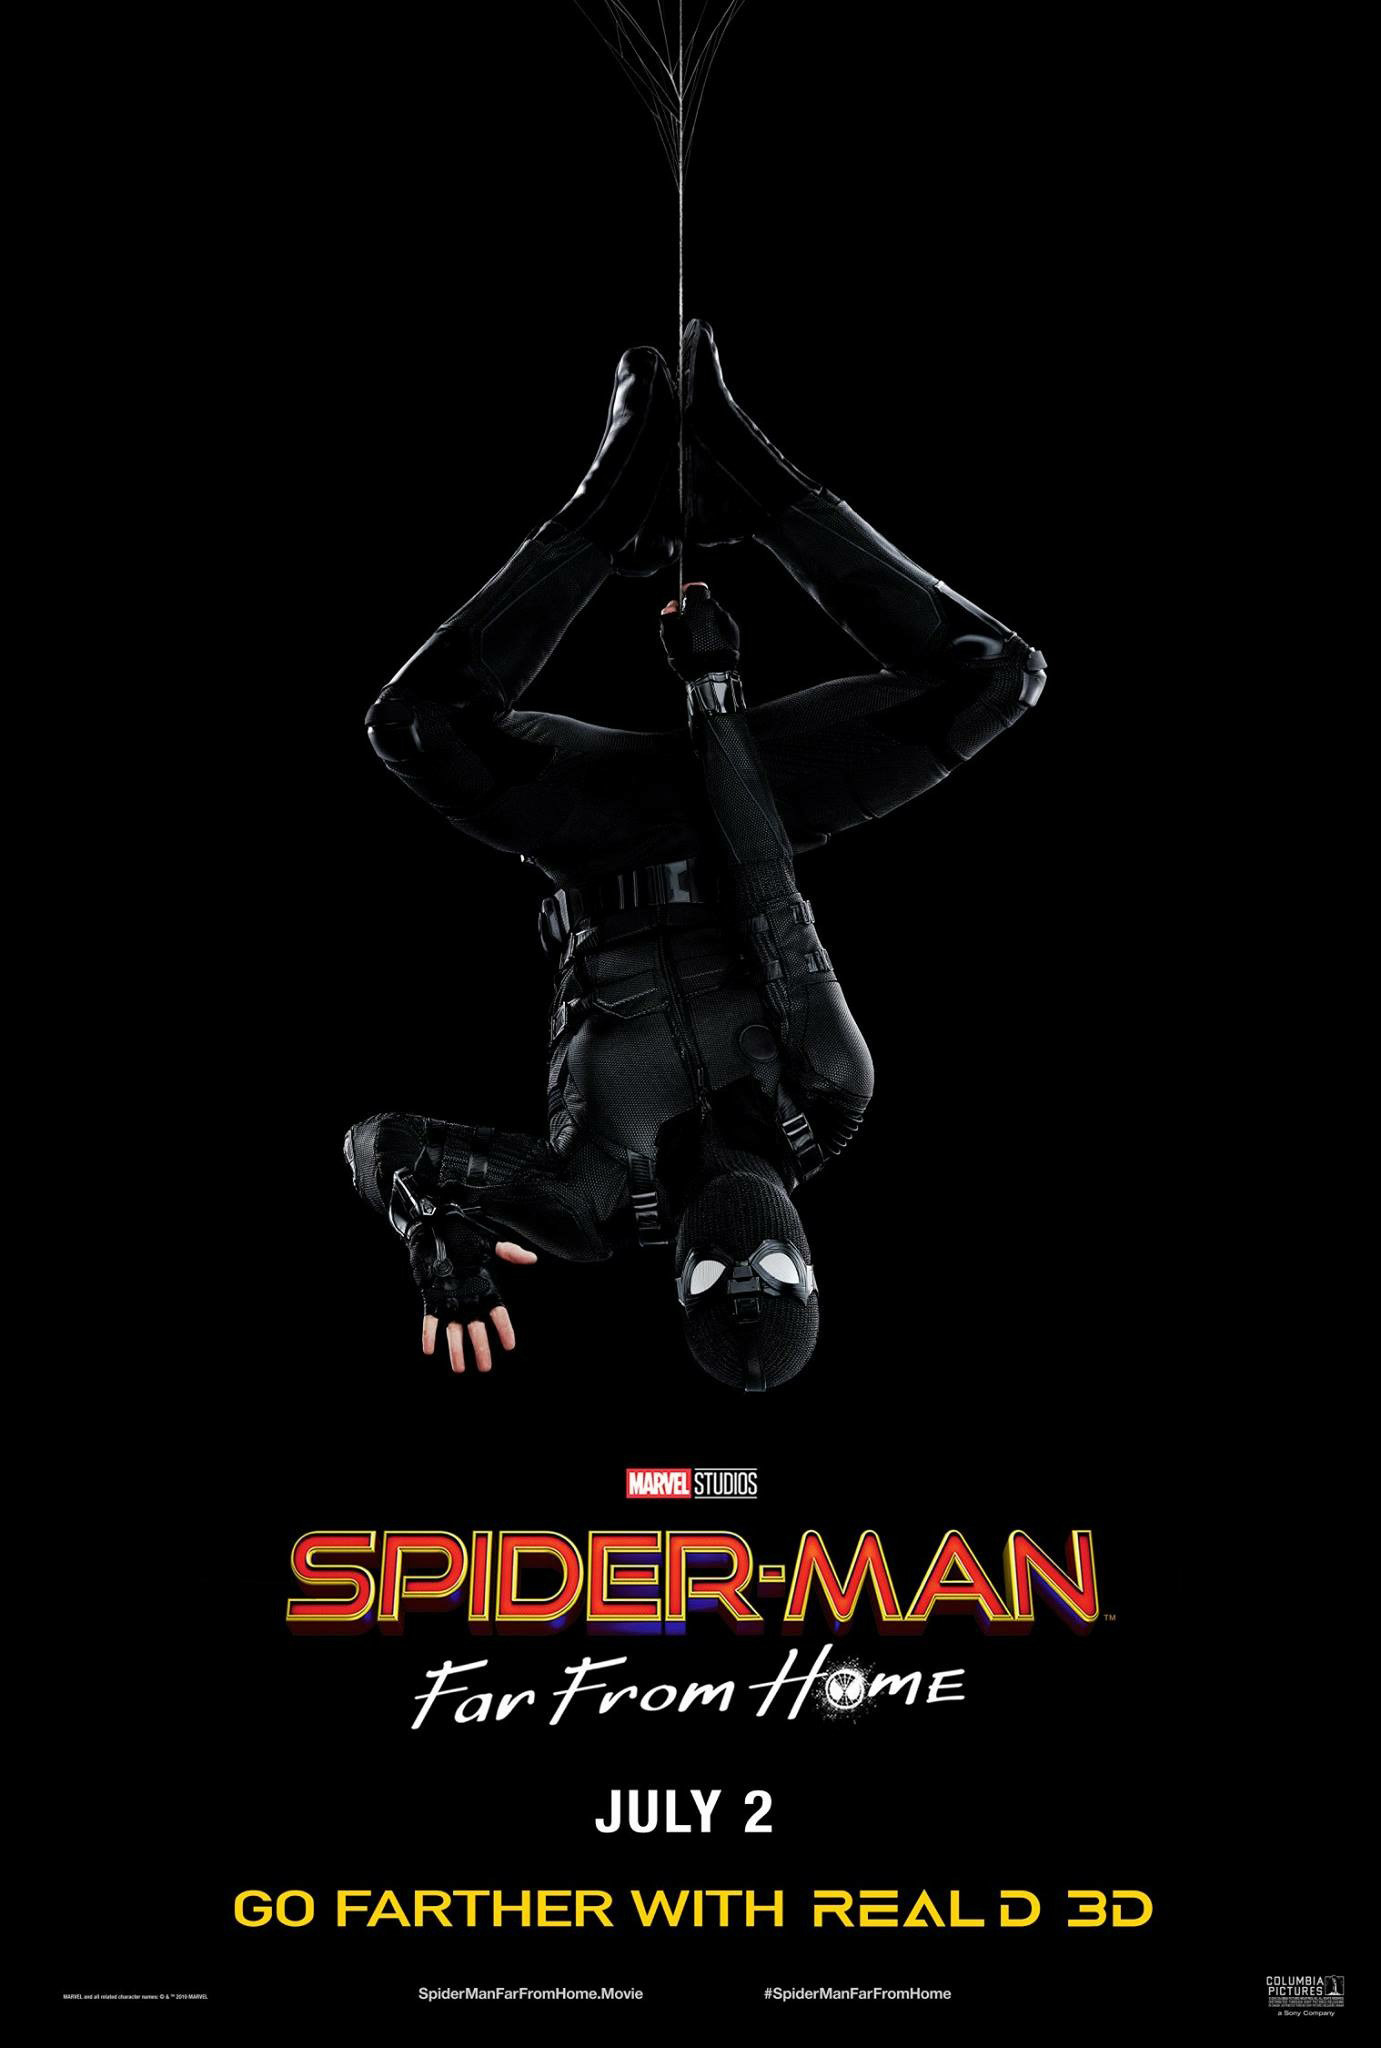 the poster, with Peter Parker in his black tactical suit